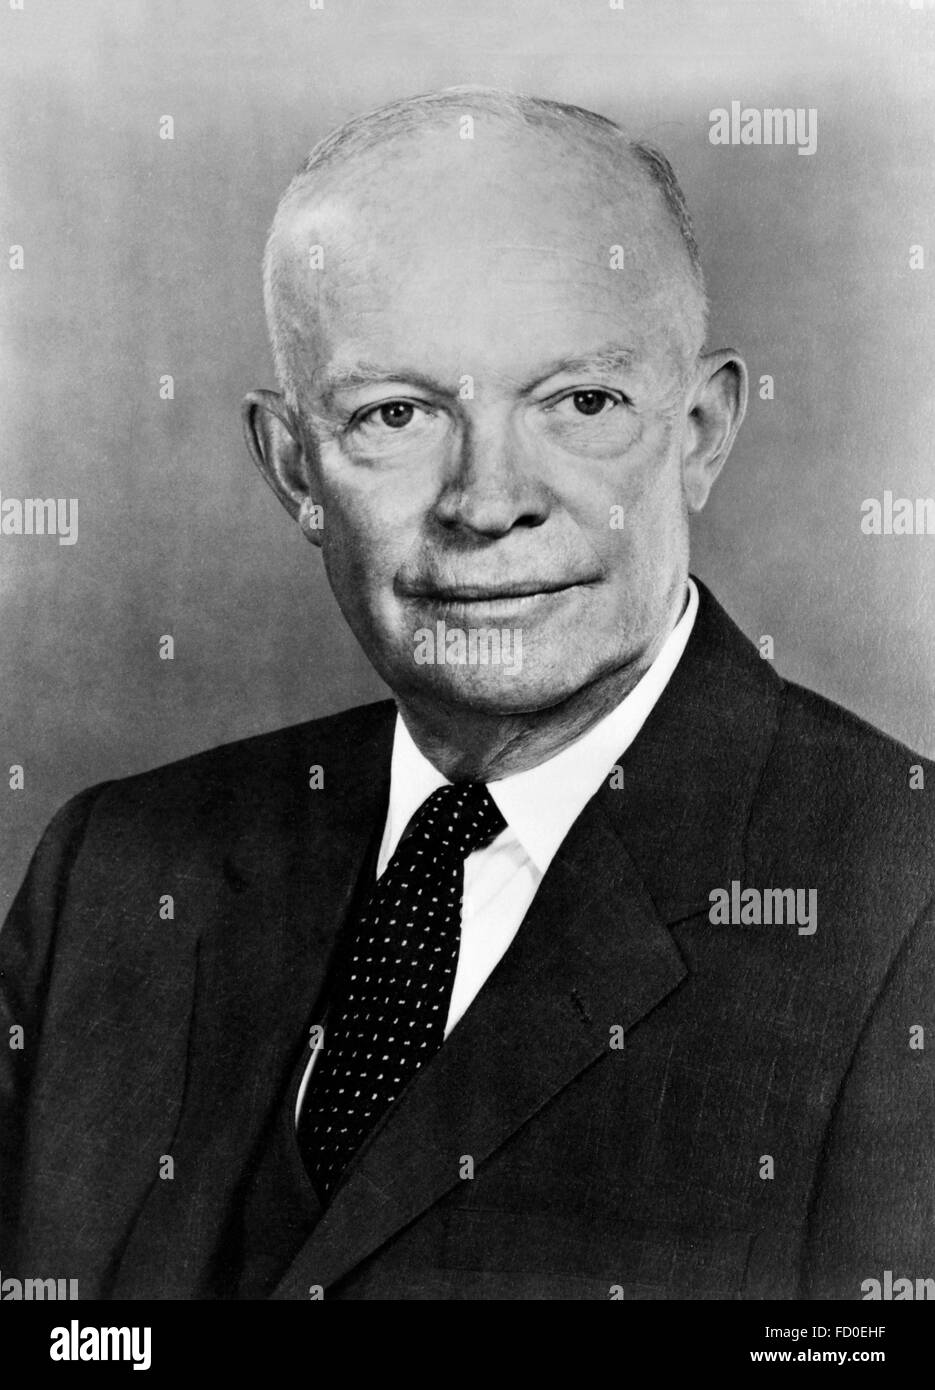 Dwight D Eisenhower, the 34th President of the USA, c.1950-1960 Stock Photo